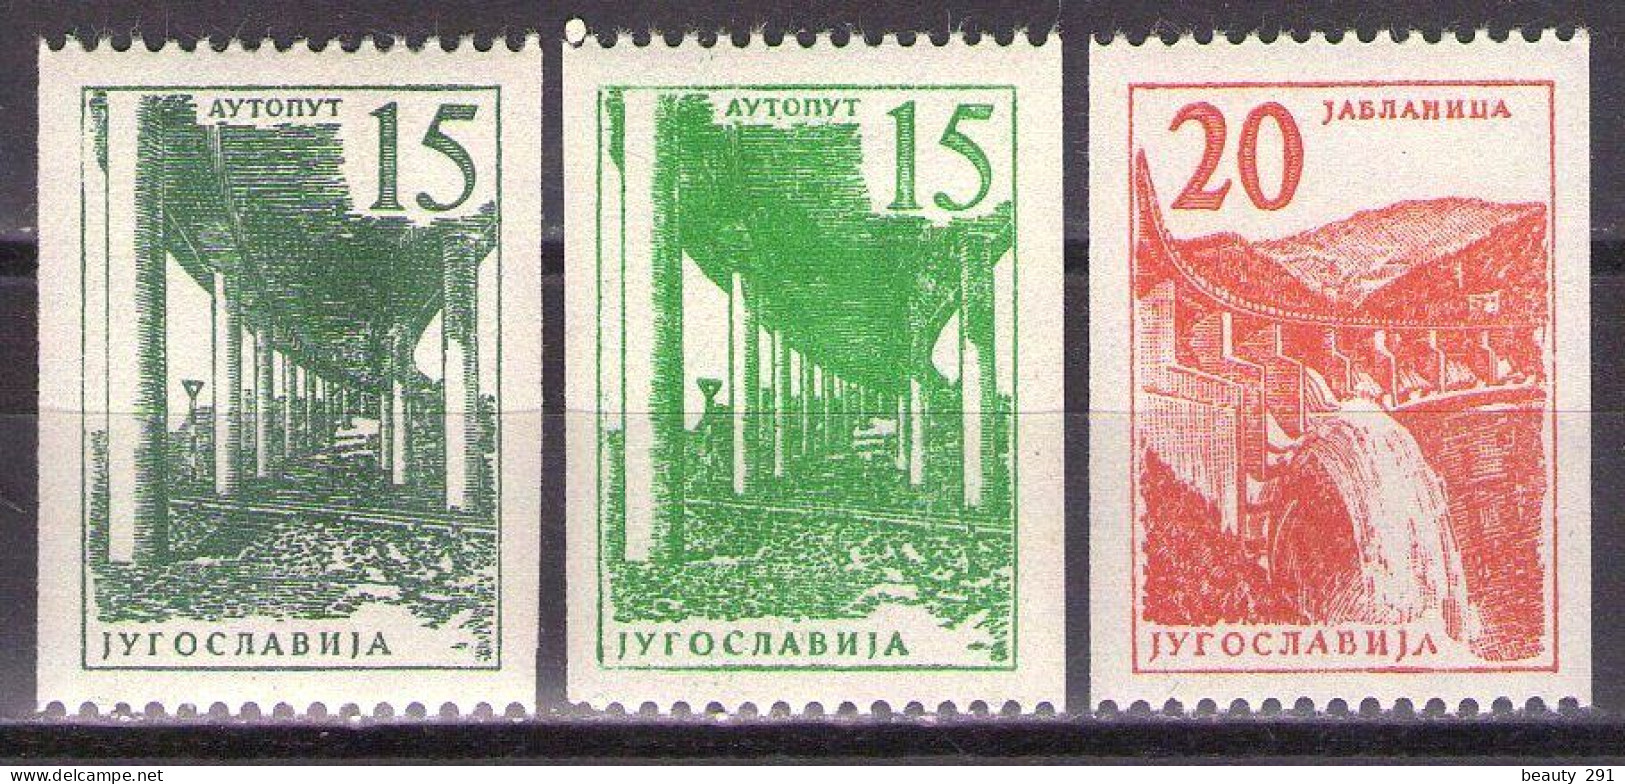 Yugoslavia 1959 - Industry And Architecture Coil Stamps - Mi 898-899a,b - MNH**VF - Nuovi